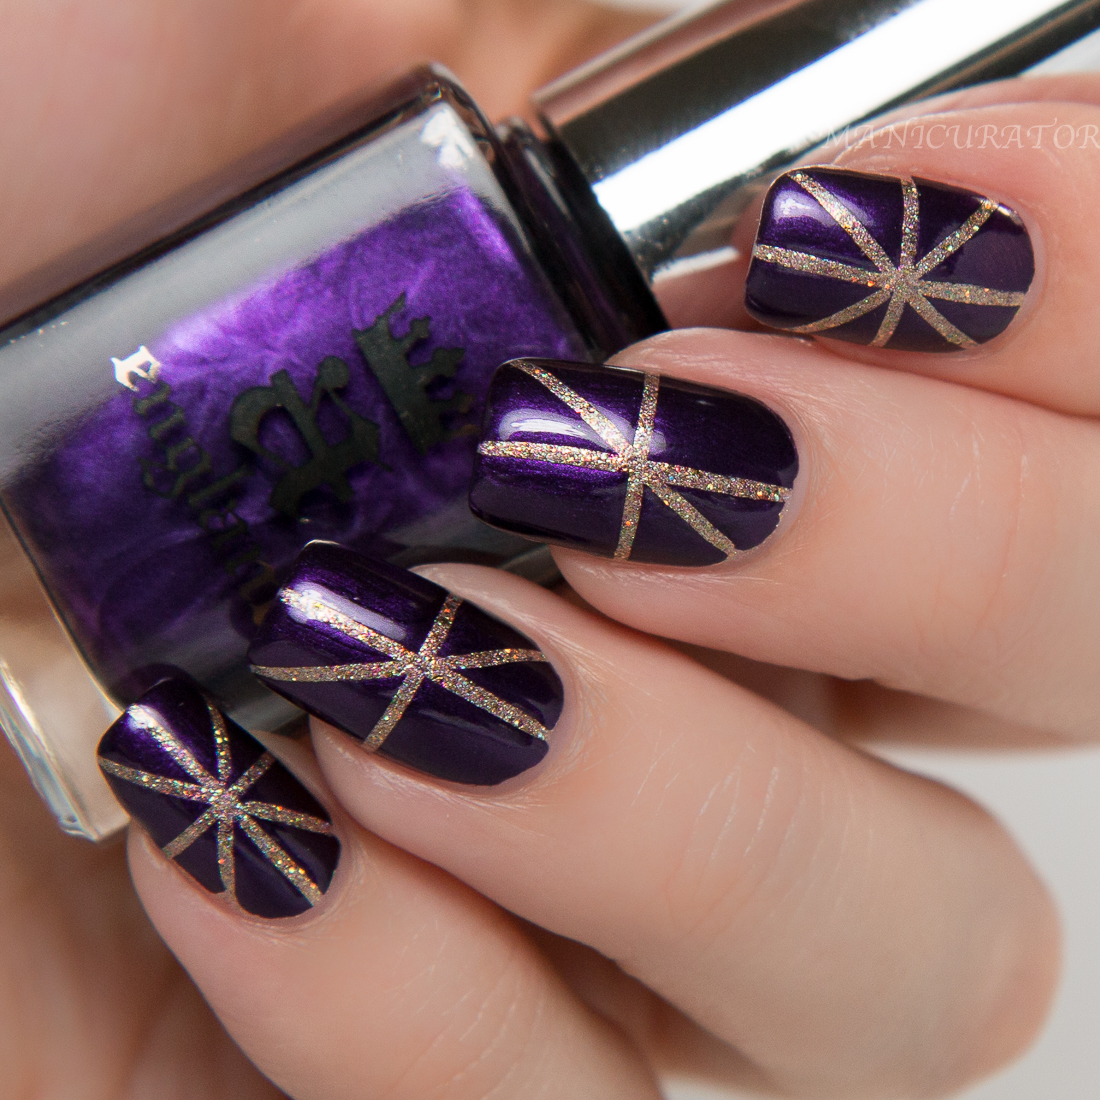 A-England-The-Blessed-Damozel-Heavenly-Quotes-Swatch-Nail-Art